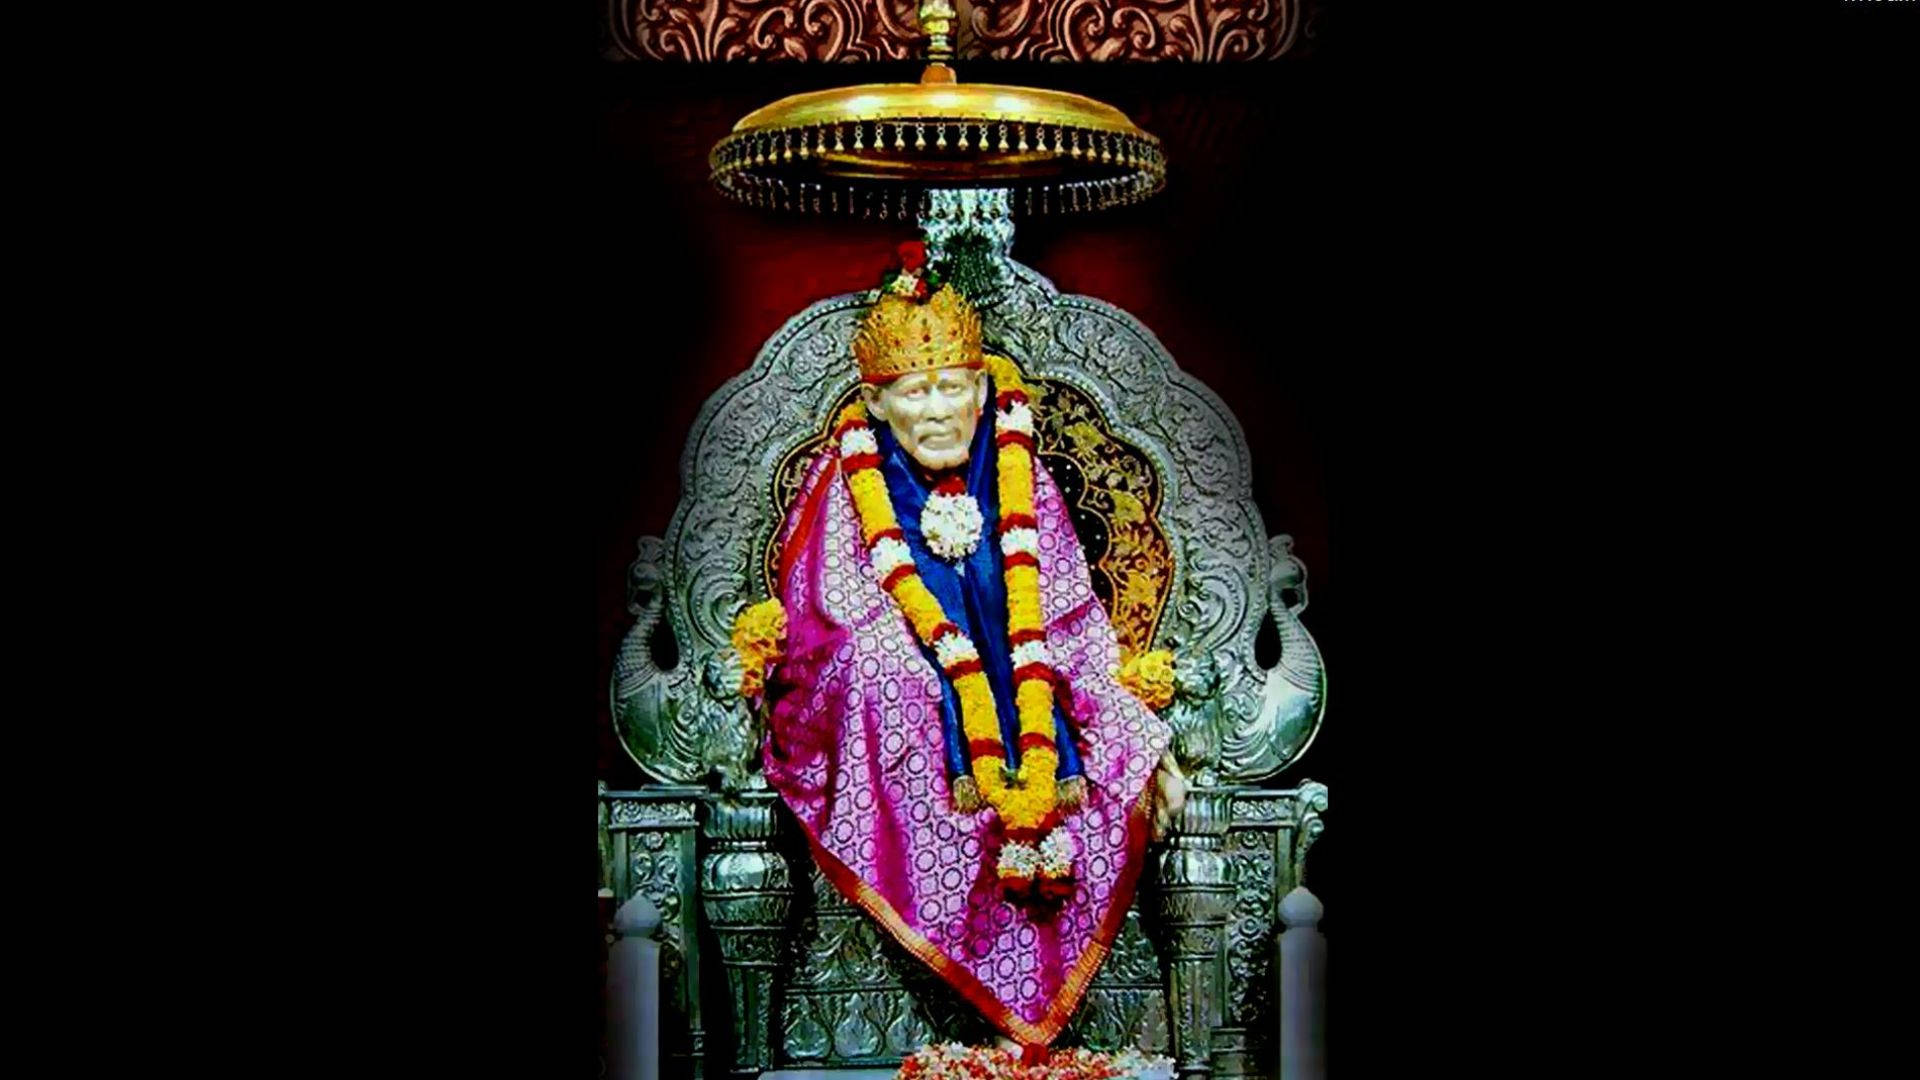 Sai Baba Hd On Throne With Garland Background